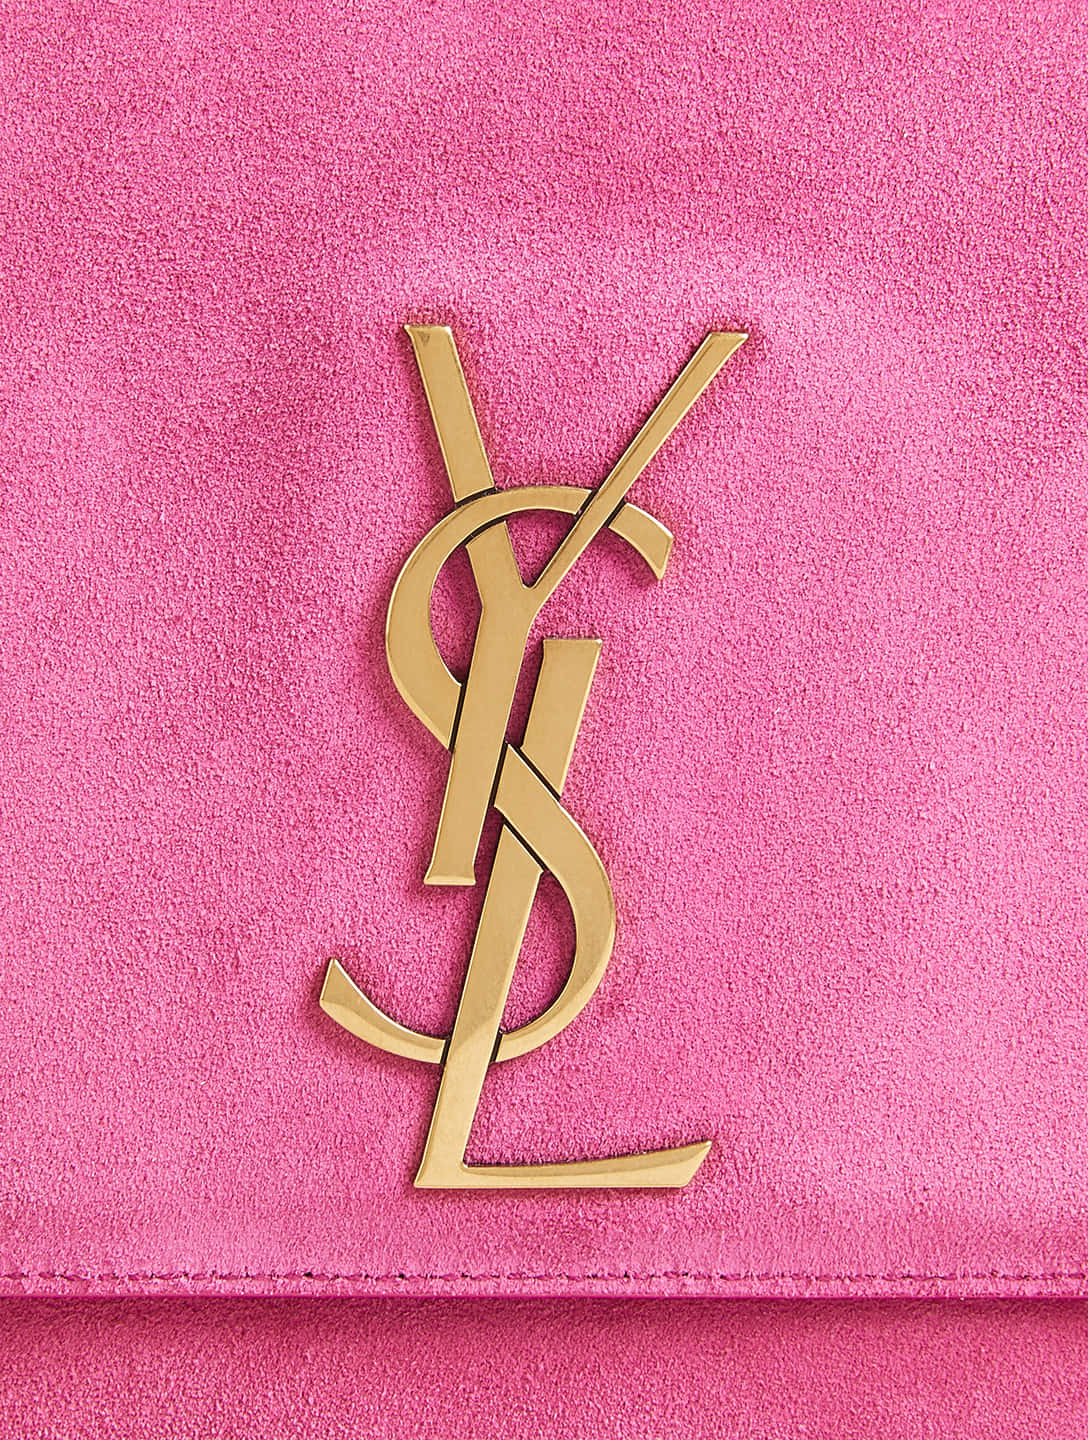 Yves Saint Laurent Ysl Saffiano Clutch Bag In Pink